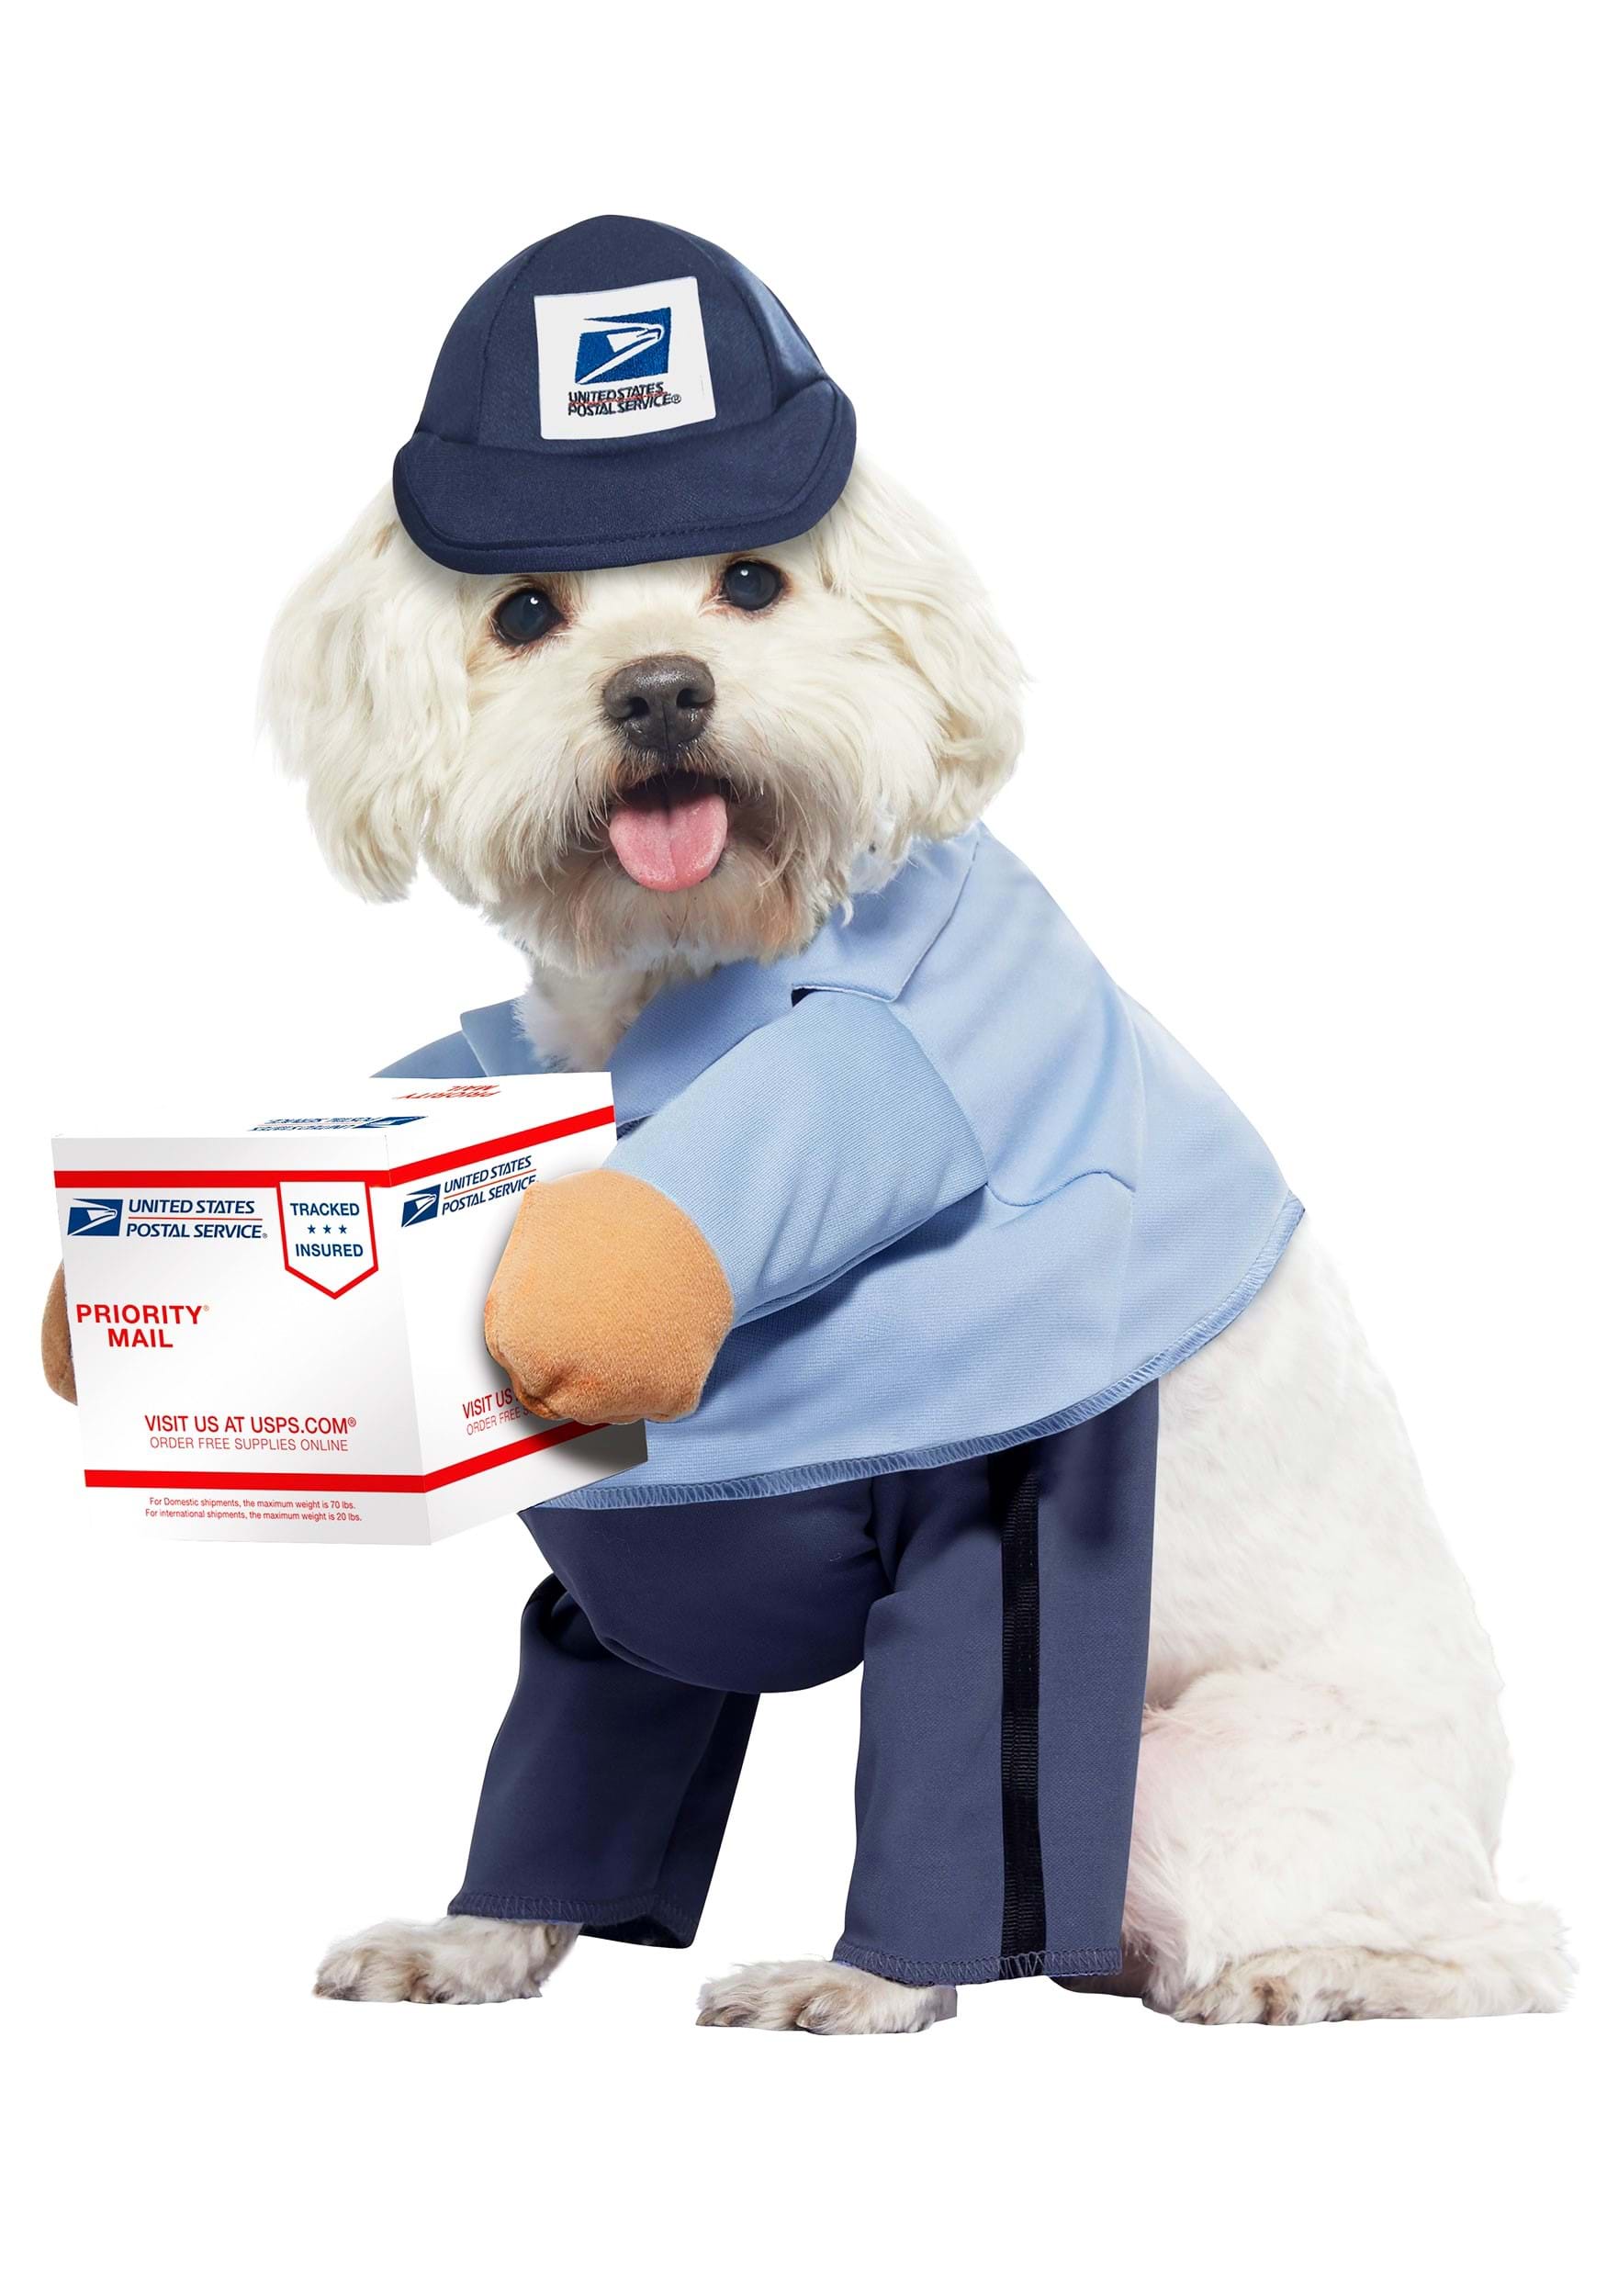 https://images.halloweencostumes.eu/products/57553/3-1/usps-dog-mail-carrier-costume.jpg